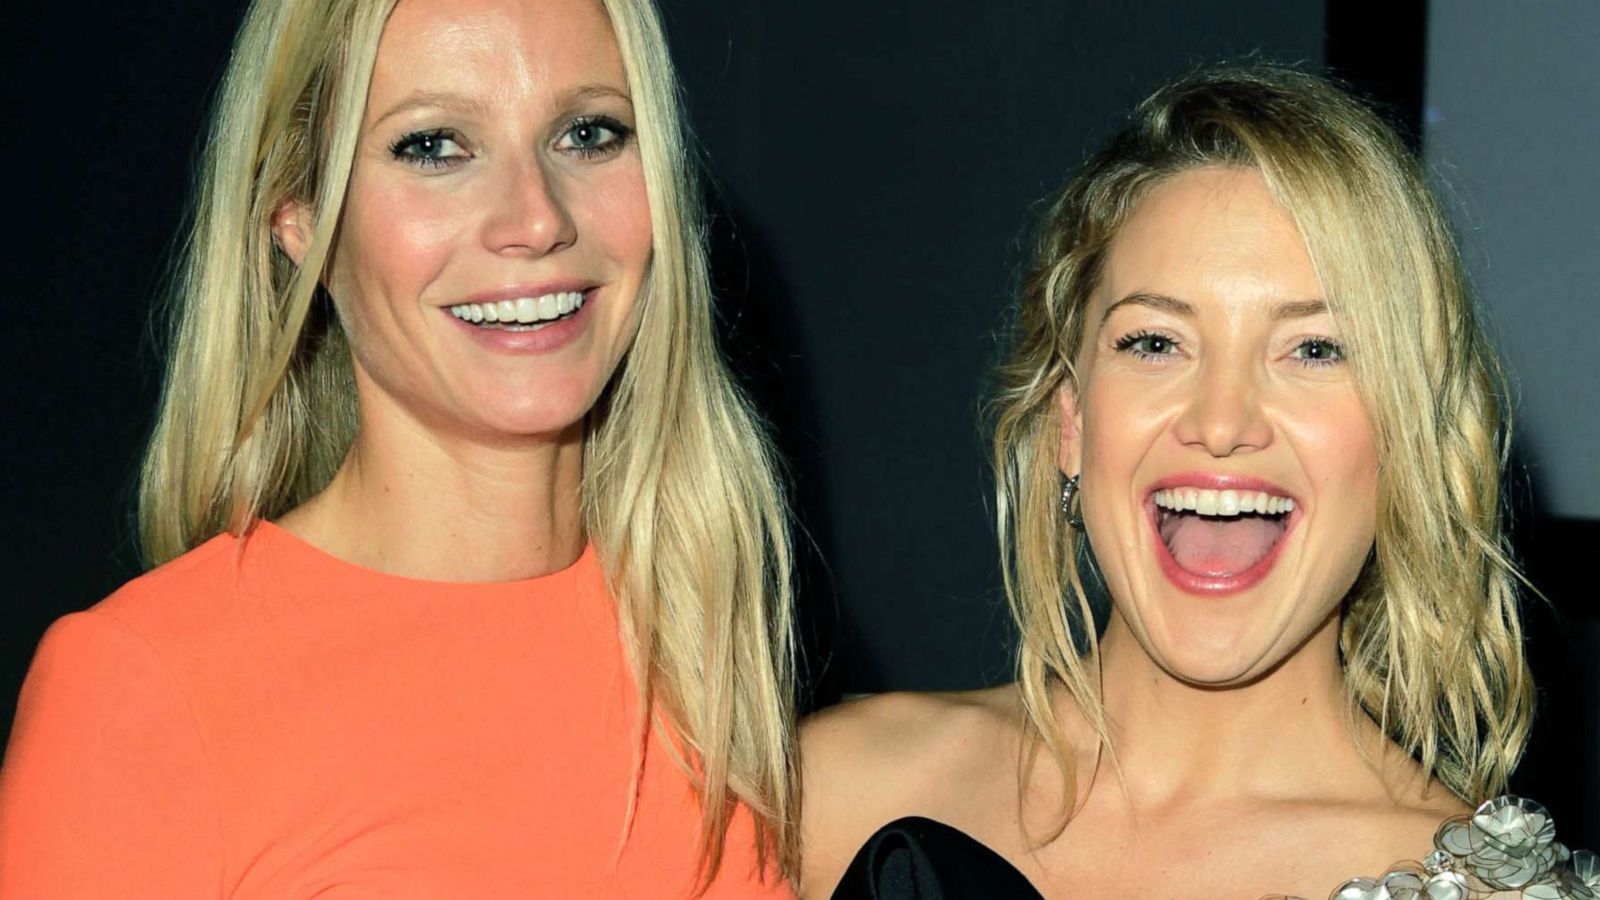 Paltrow says Horn tried to kiss her